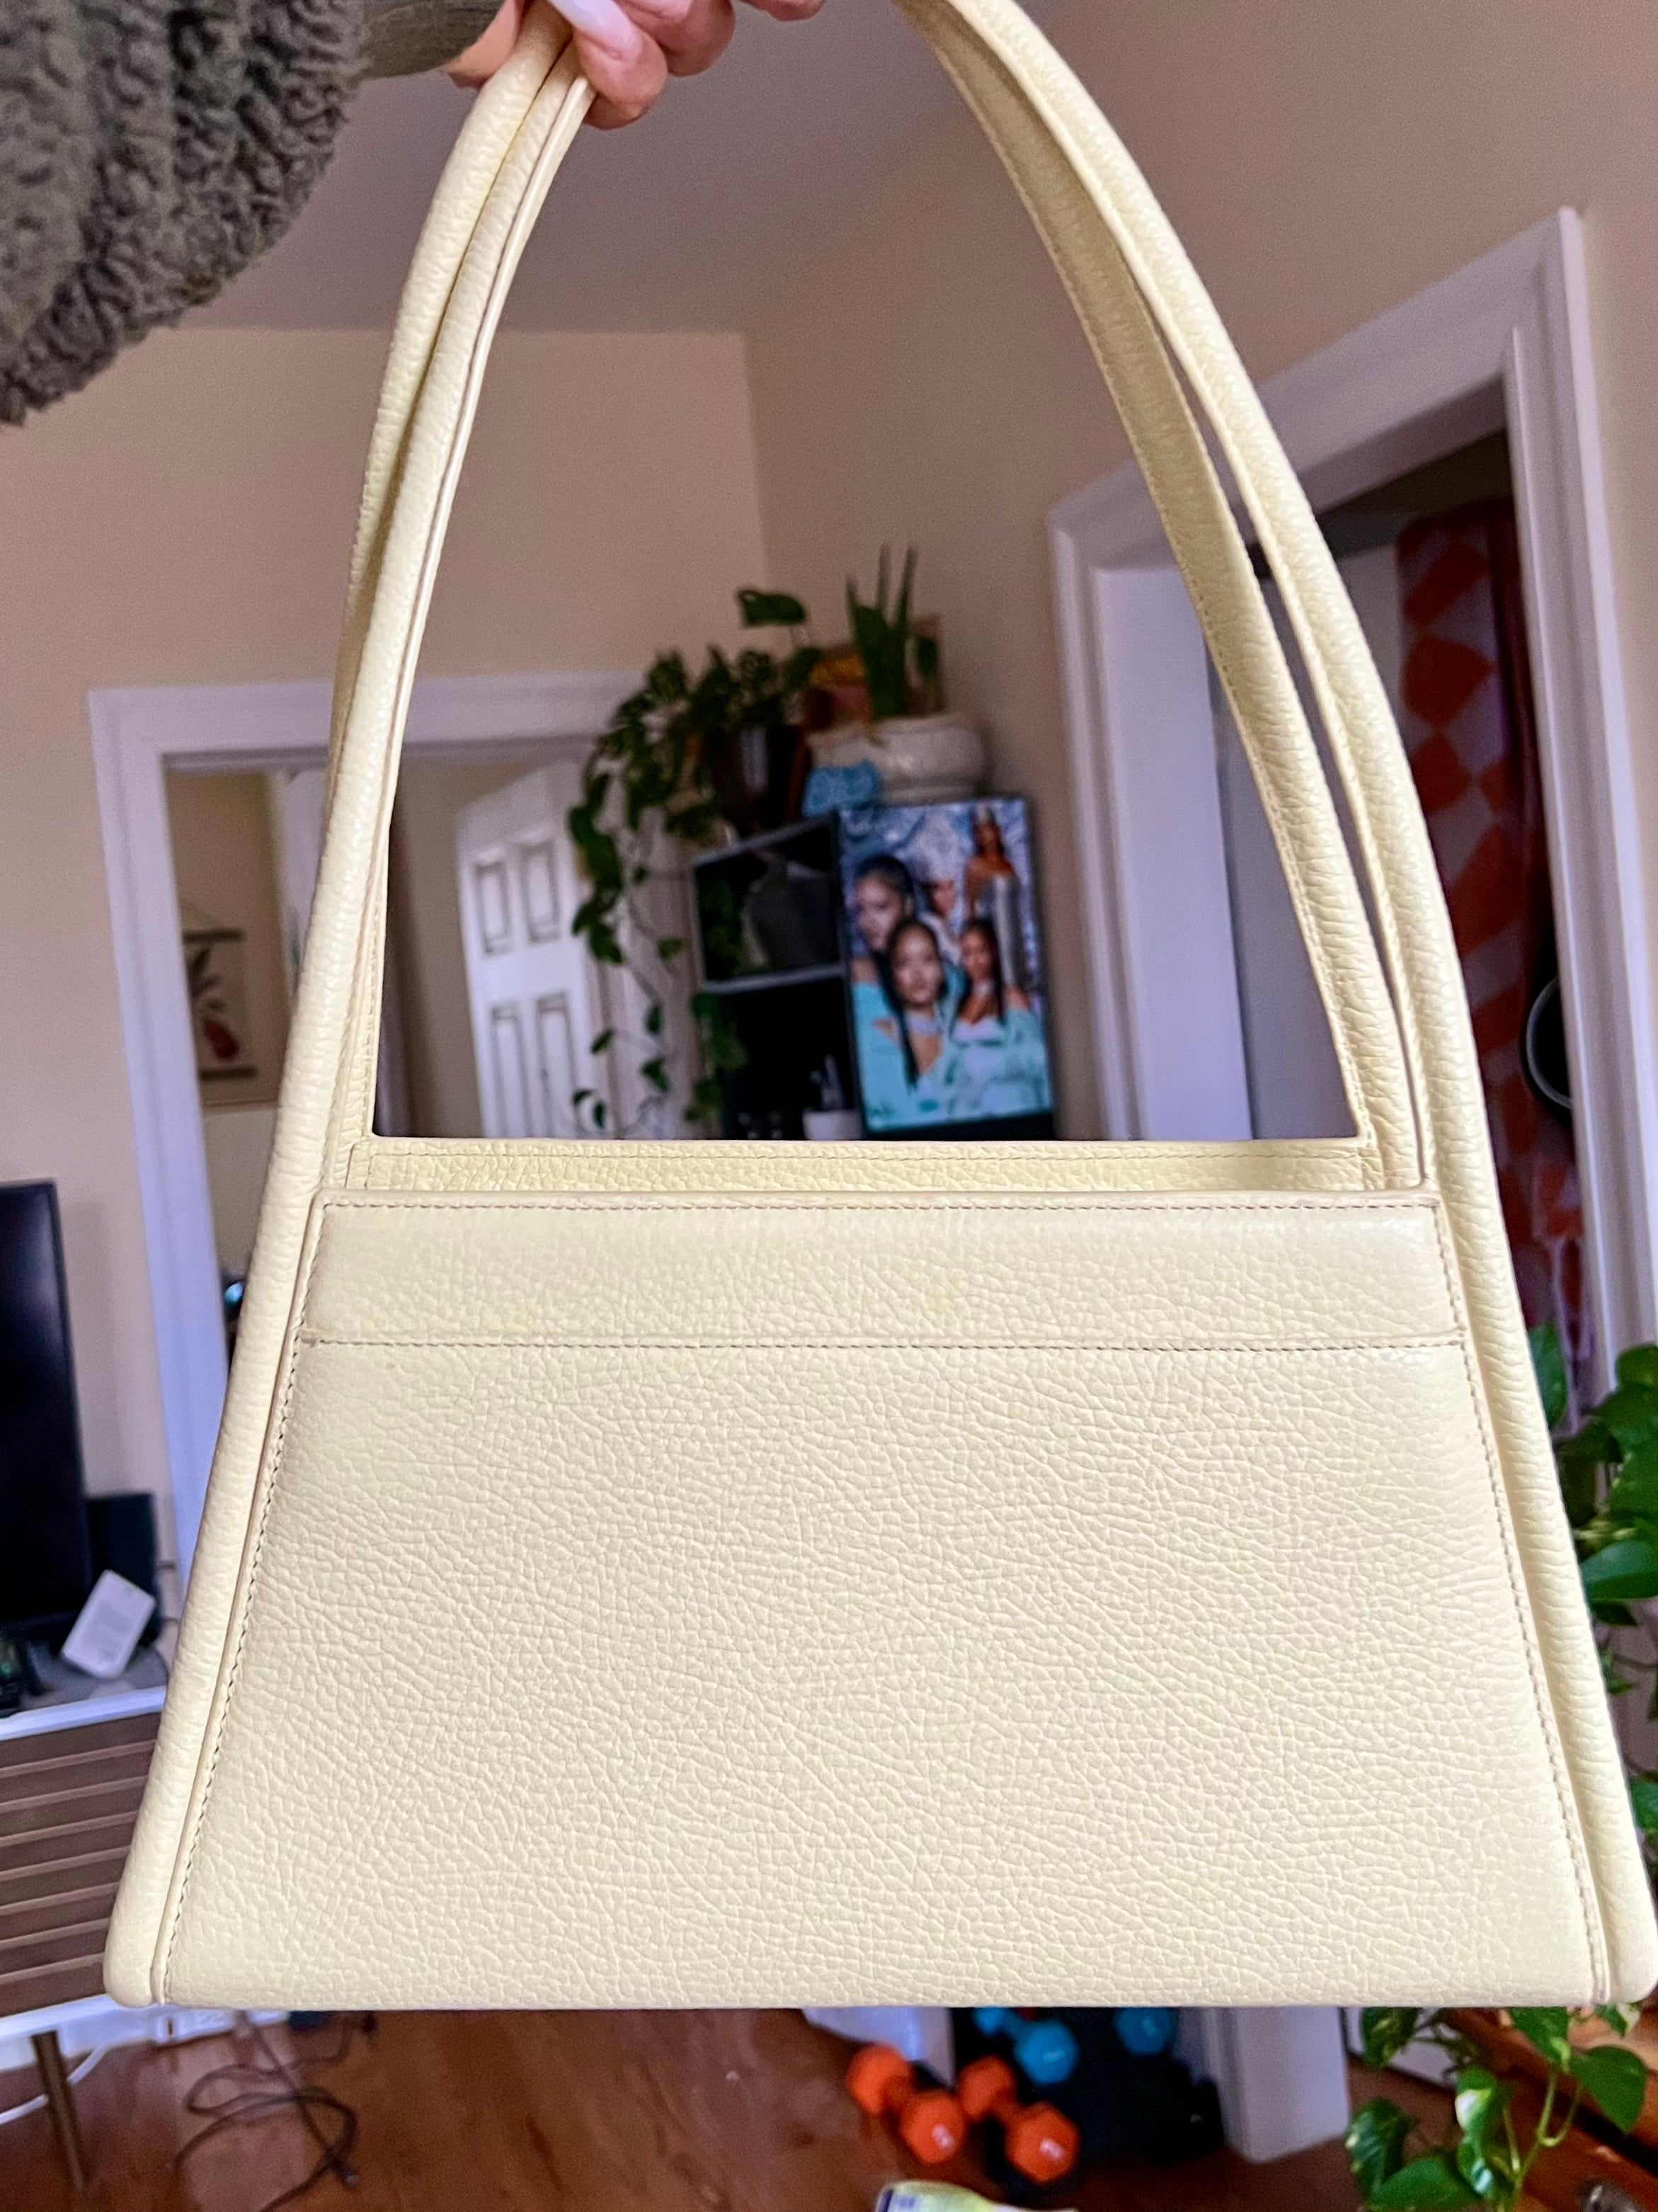 Behno Handbag review: Why we love this AAPI-owned accessory brand - Reviewed